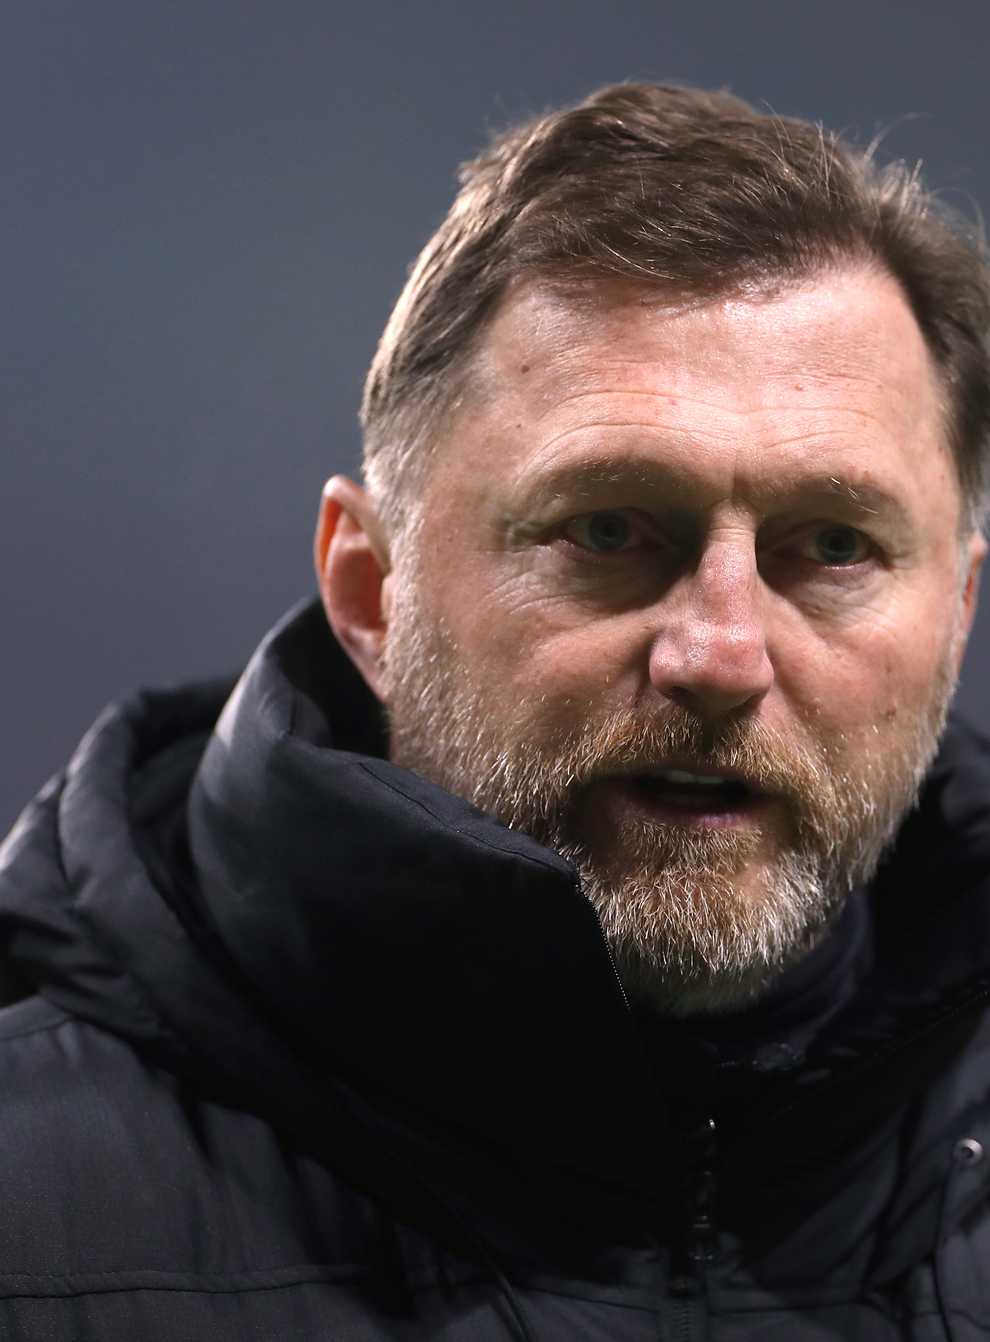 Southampton manager Ralph Hasenhuttl is confident with his Southampton side (Bradley Collyer/PA)